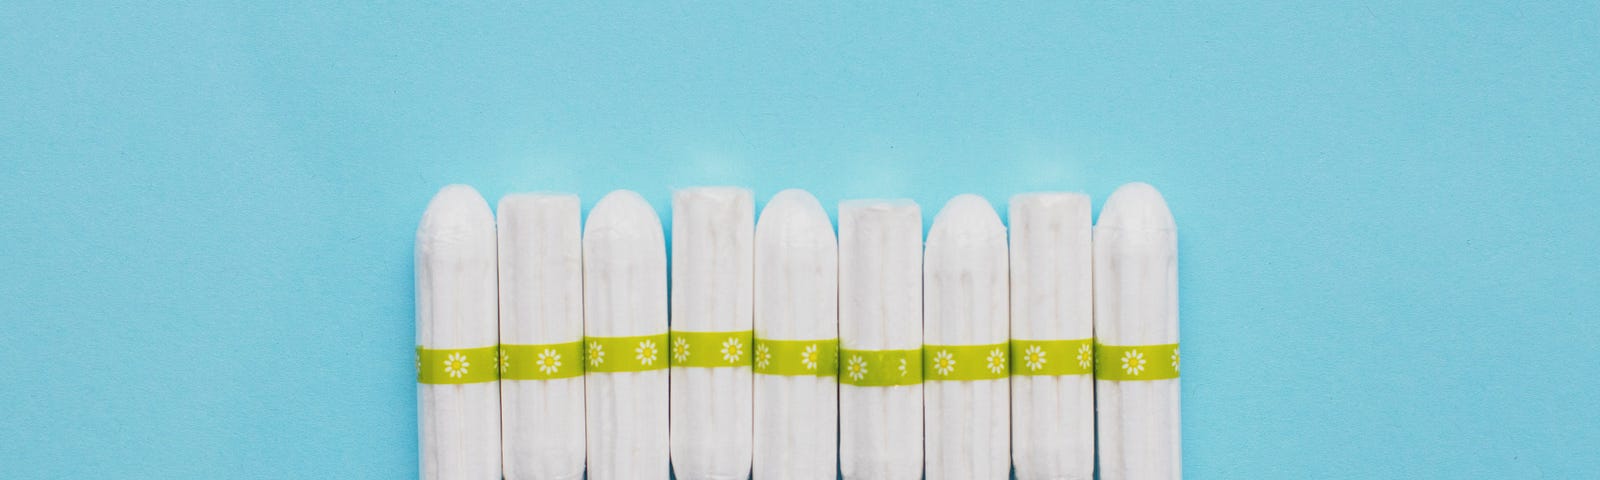 Nine tampons are lined up next to each other horizontally on a plain blue background.